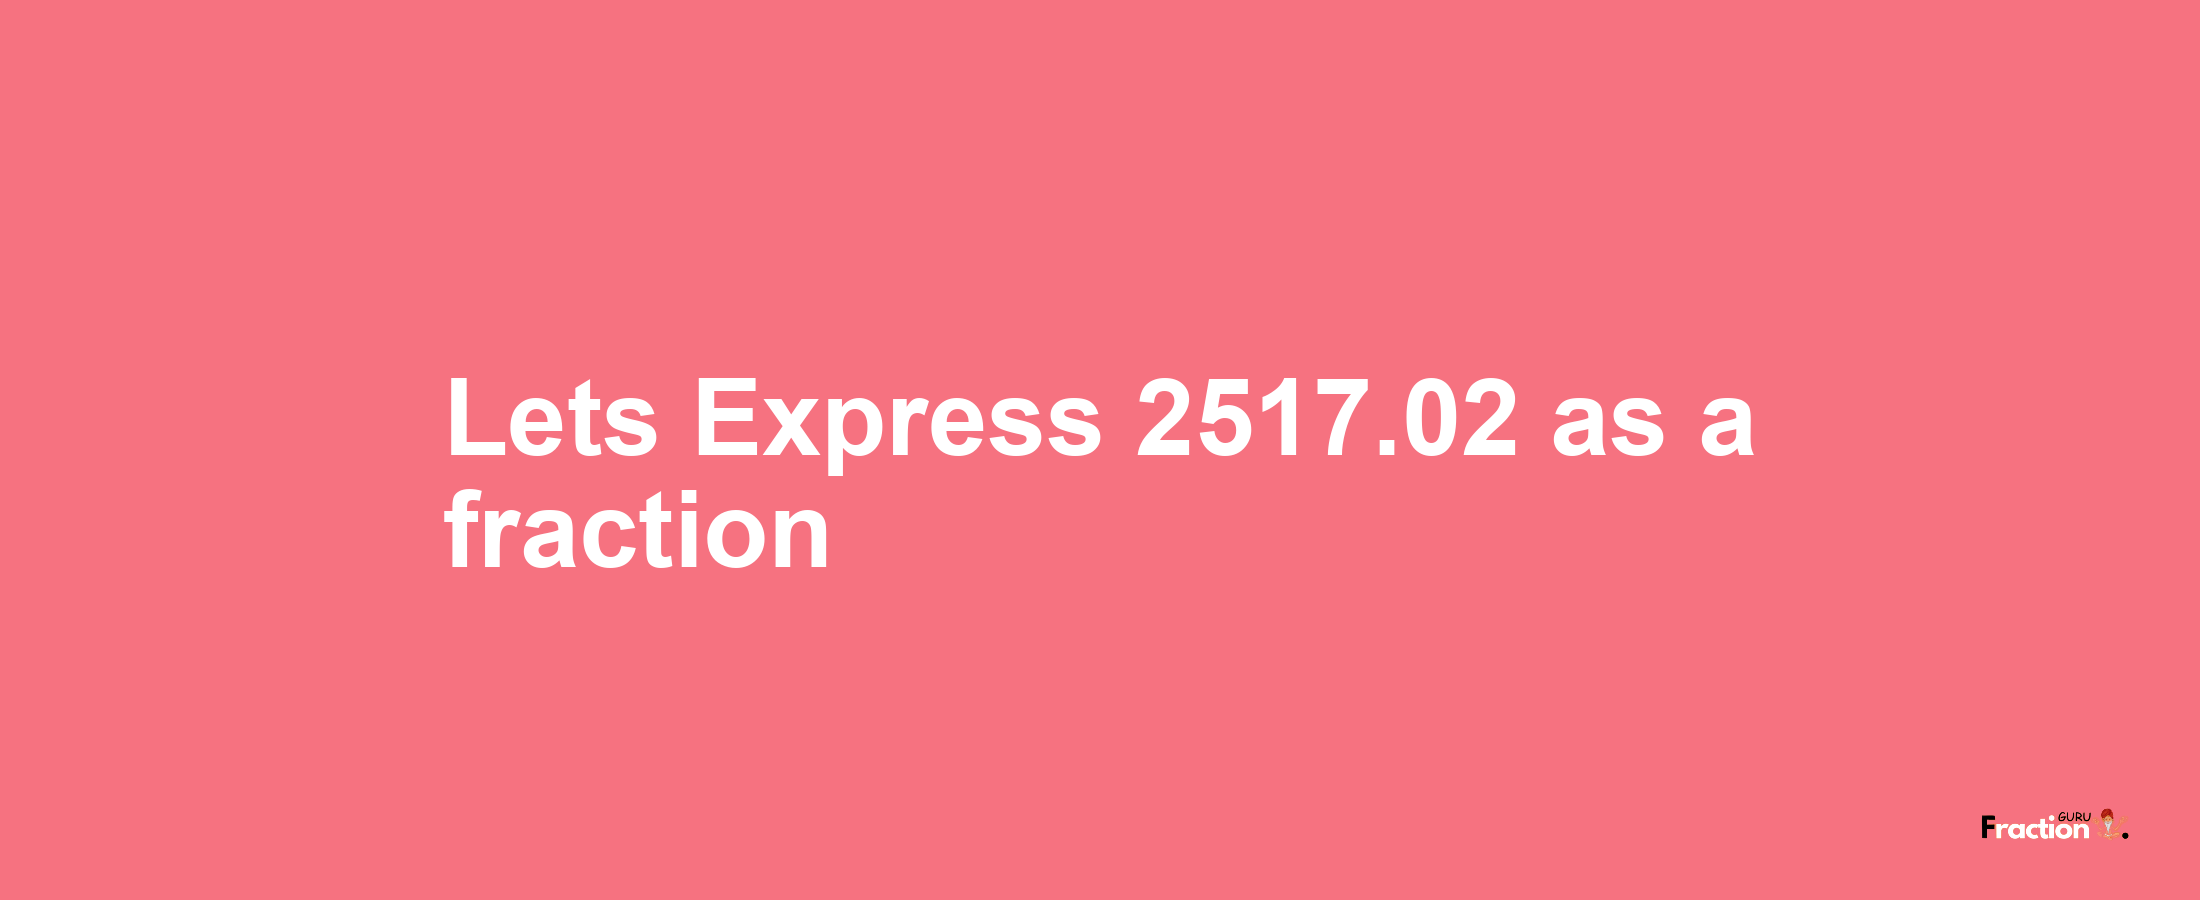 Lets Express 2517.02 as afraction